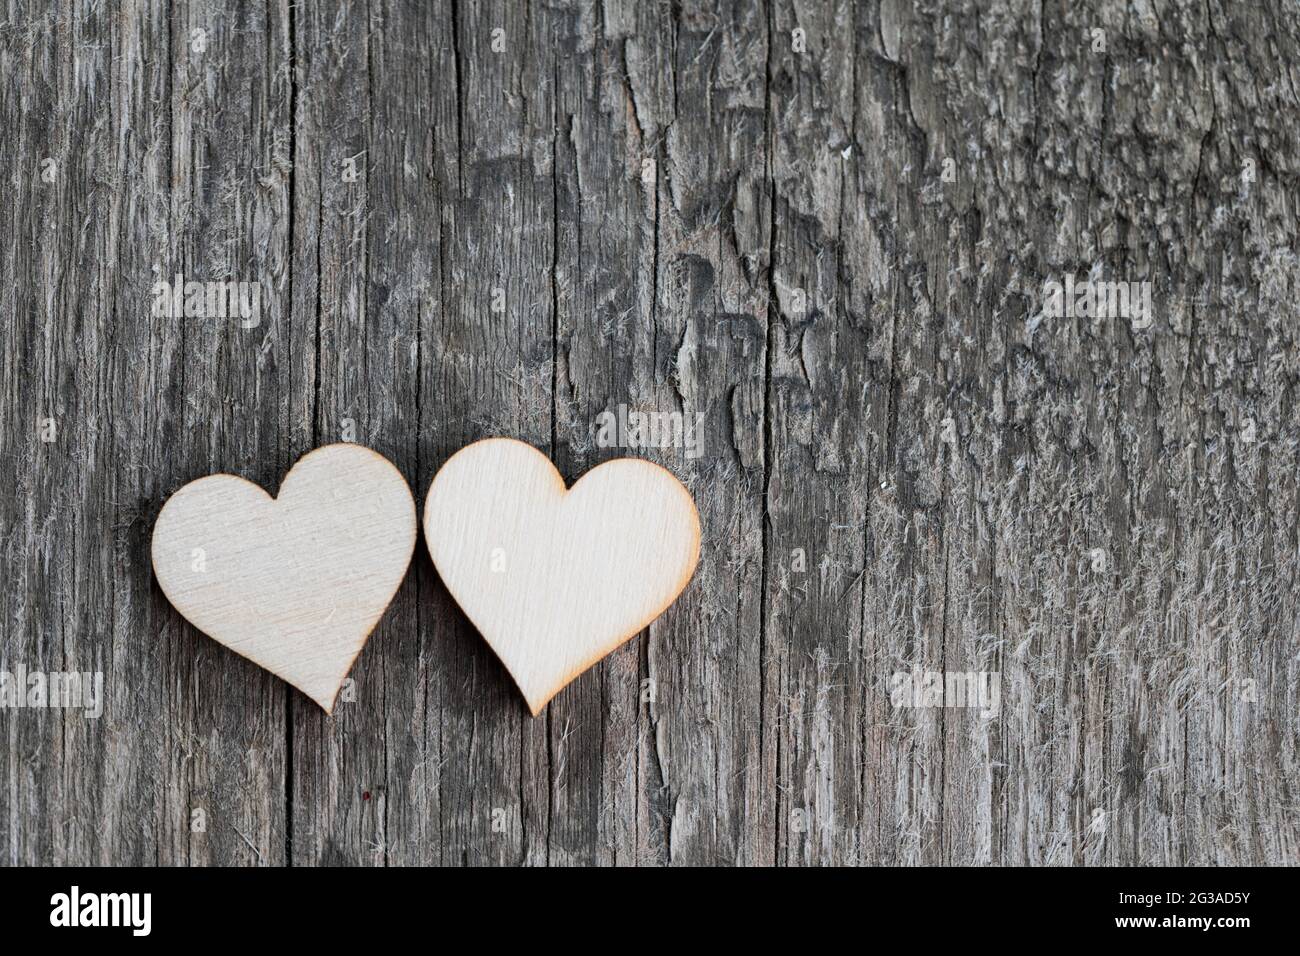 Two handmade wooden carved hearts on wood background couple relationship Valentine day concept Stock Photo